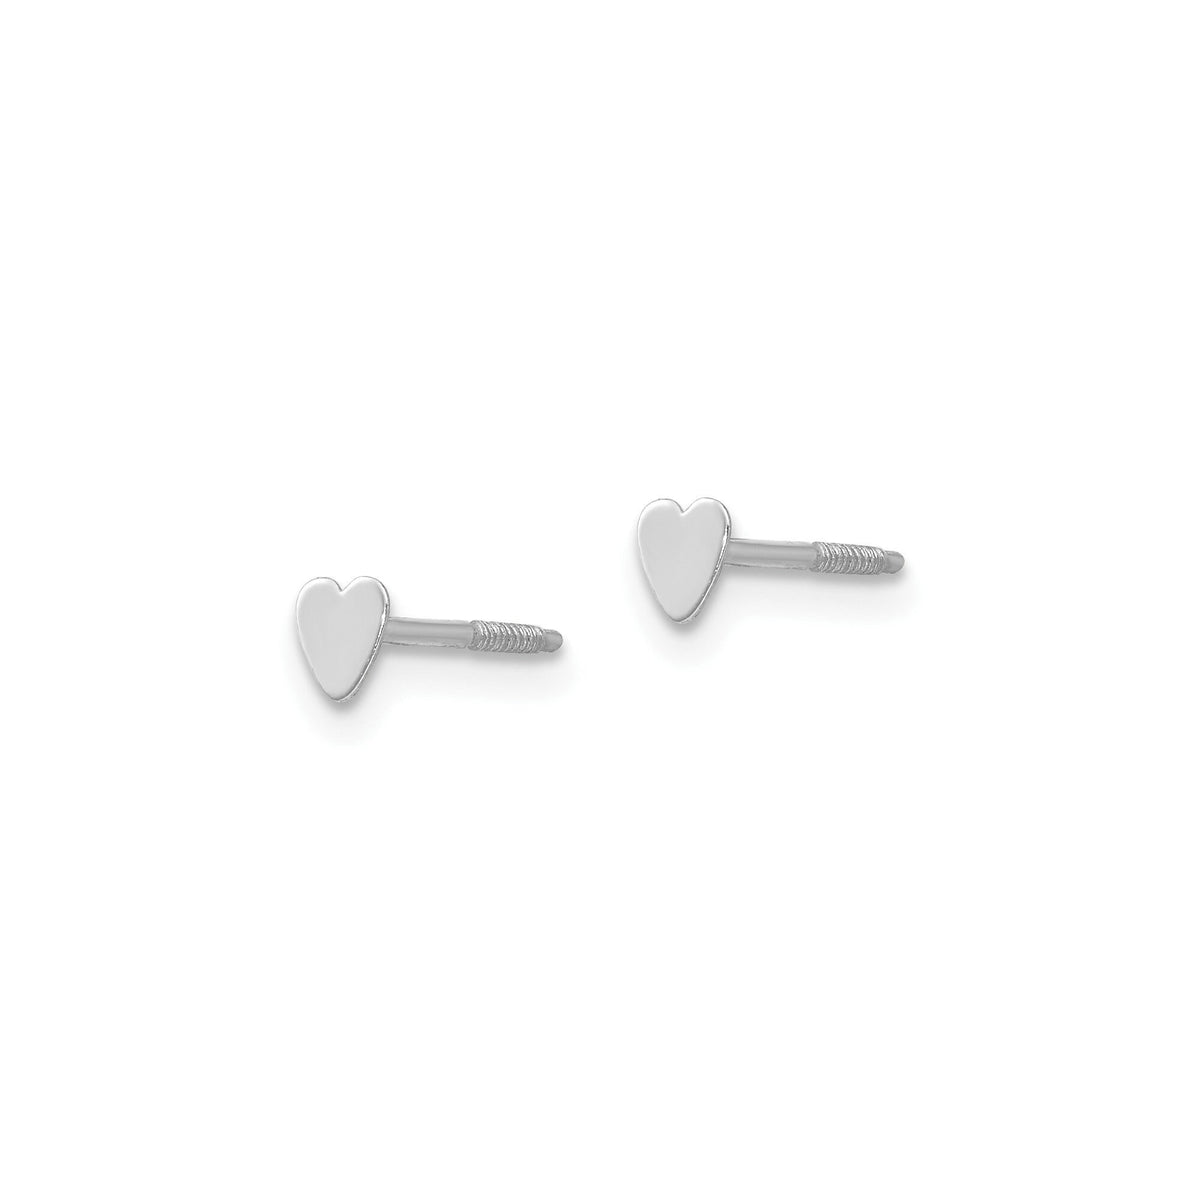 14k White Gold Tiny Heart Baby Post Earrings with Gift Box Included Toddler Earrings Infant Size